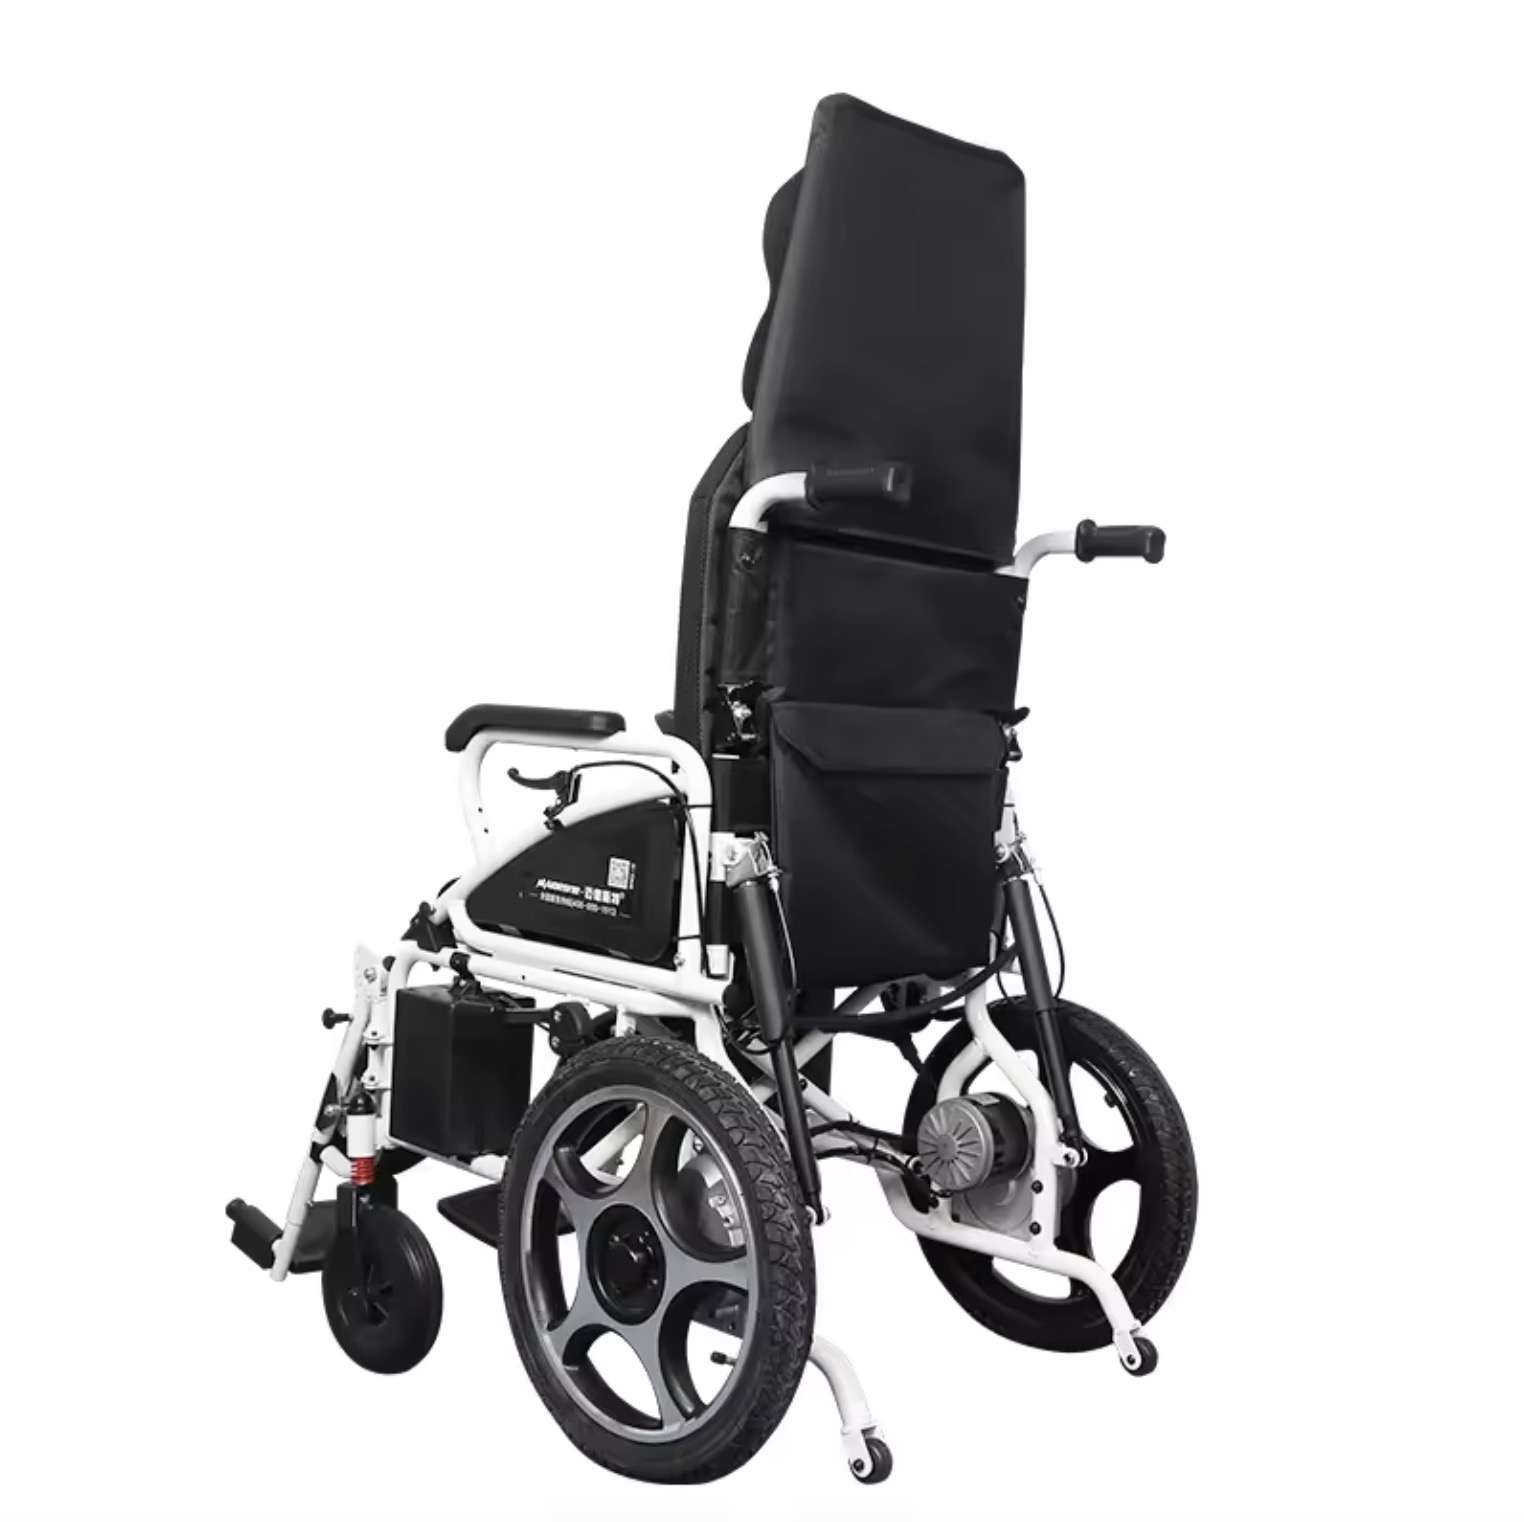 Maidesite DLY-801 Reclining High Back Electrical Wheelchair with Adjustable Armrest and Legrest